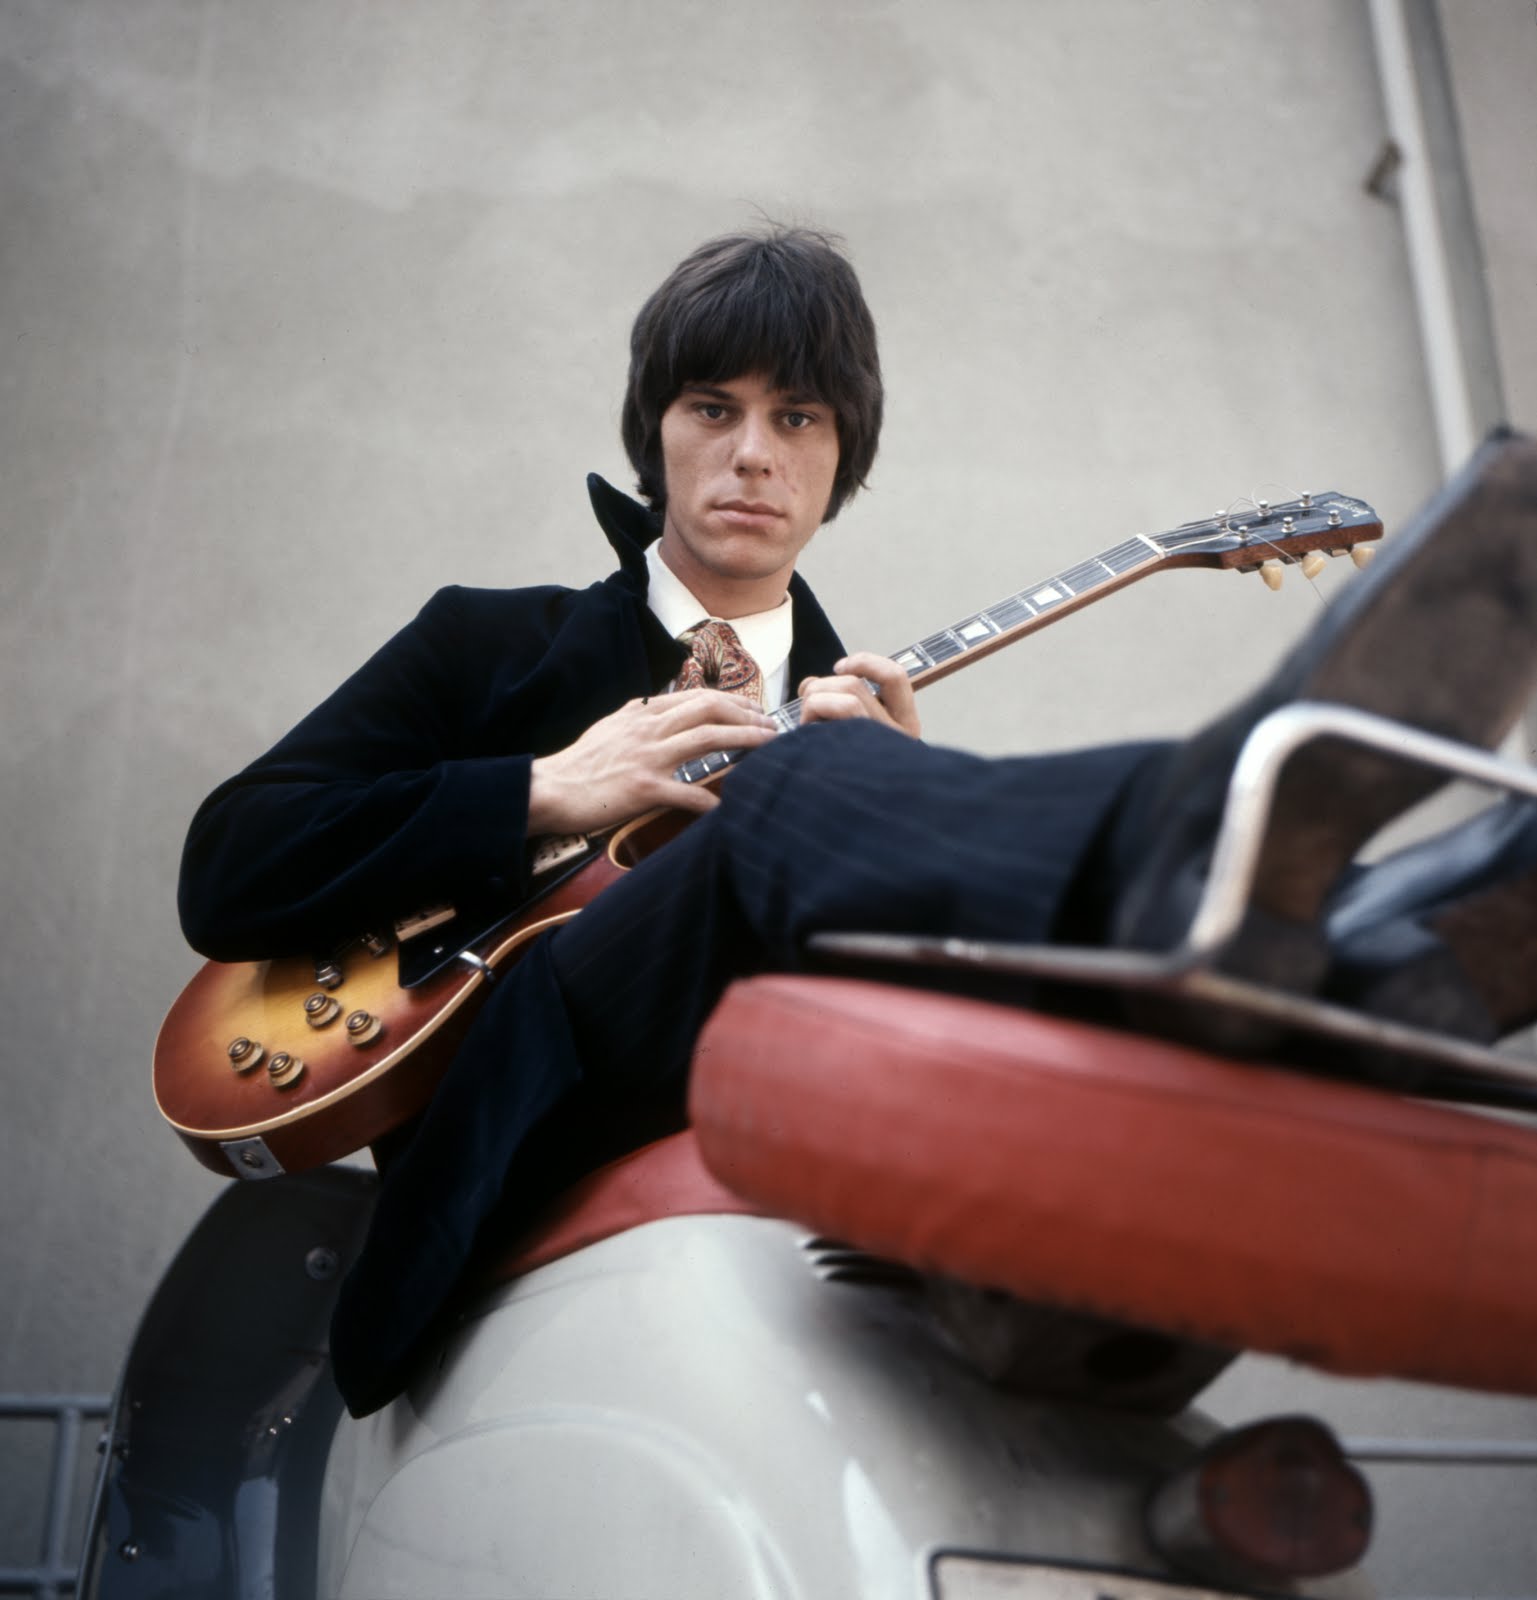 Happy (belated by one day) birthday to guitarist extraordinaire Jeff Beck - Go spin some of his songs in celebration 